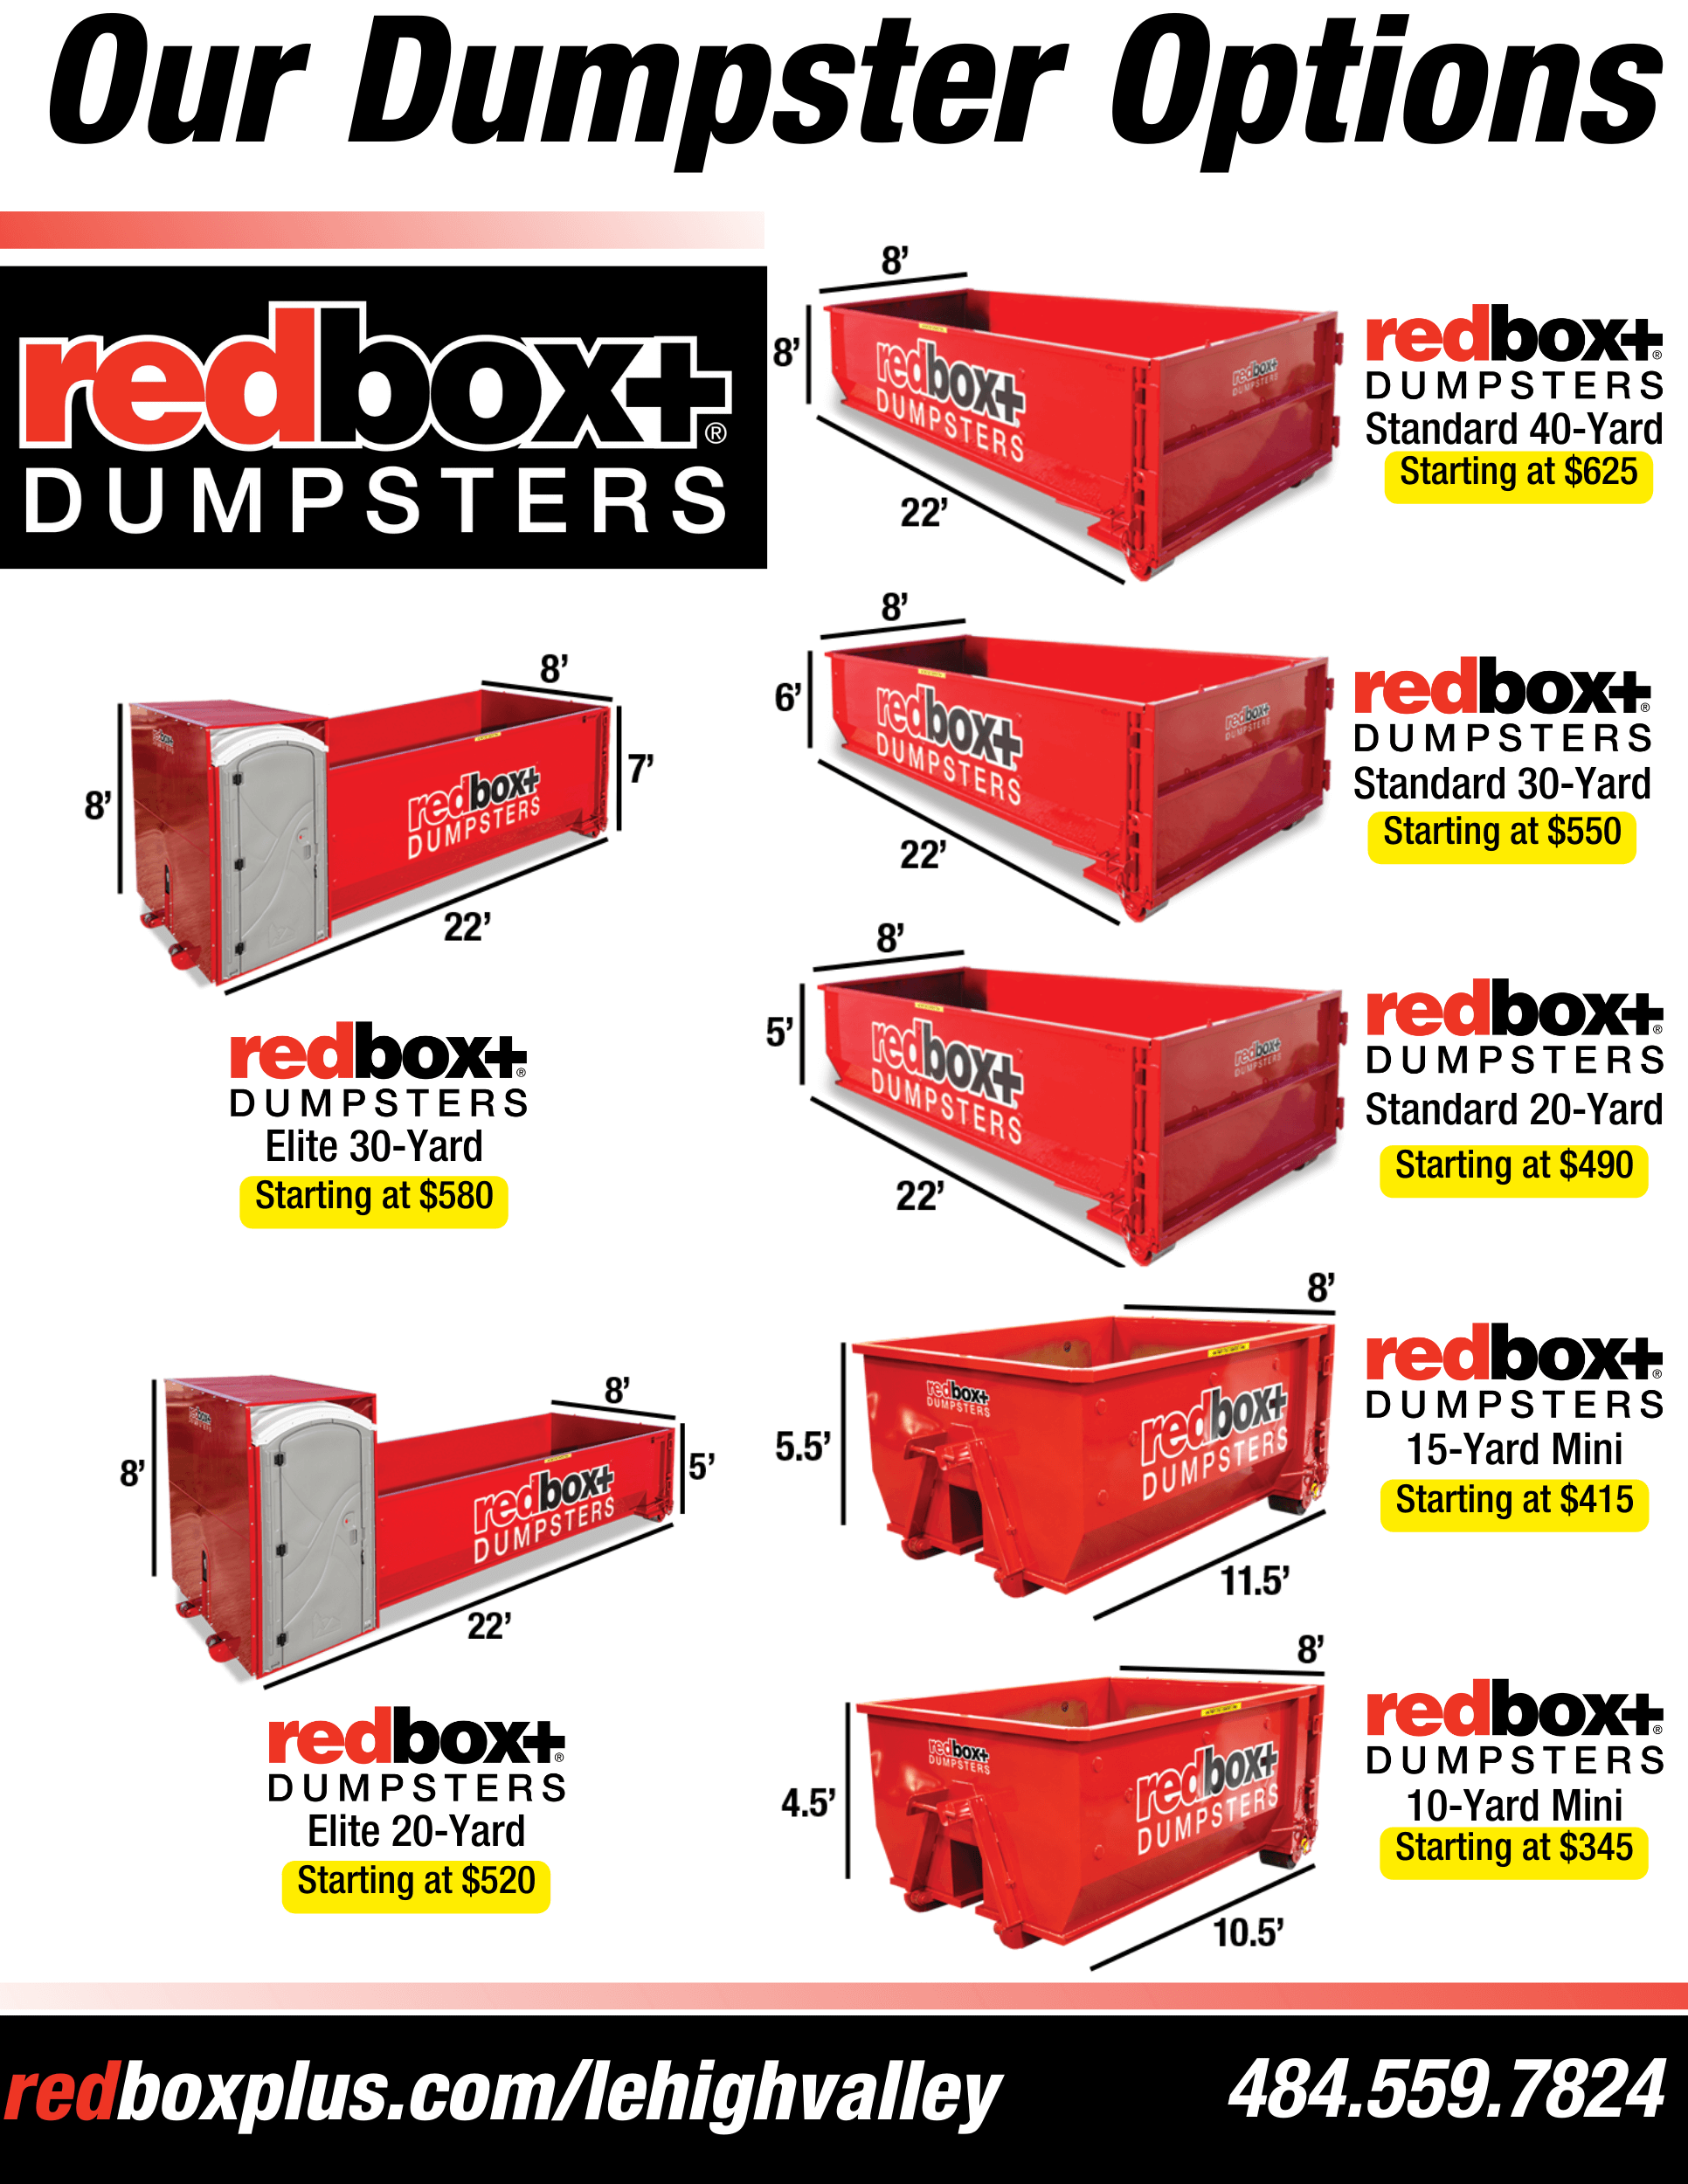 an updated list of the dumpsters we offer